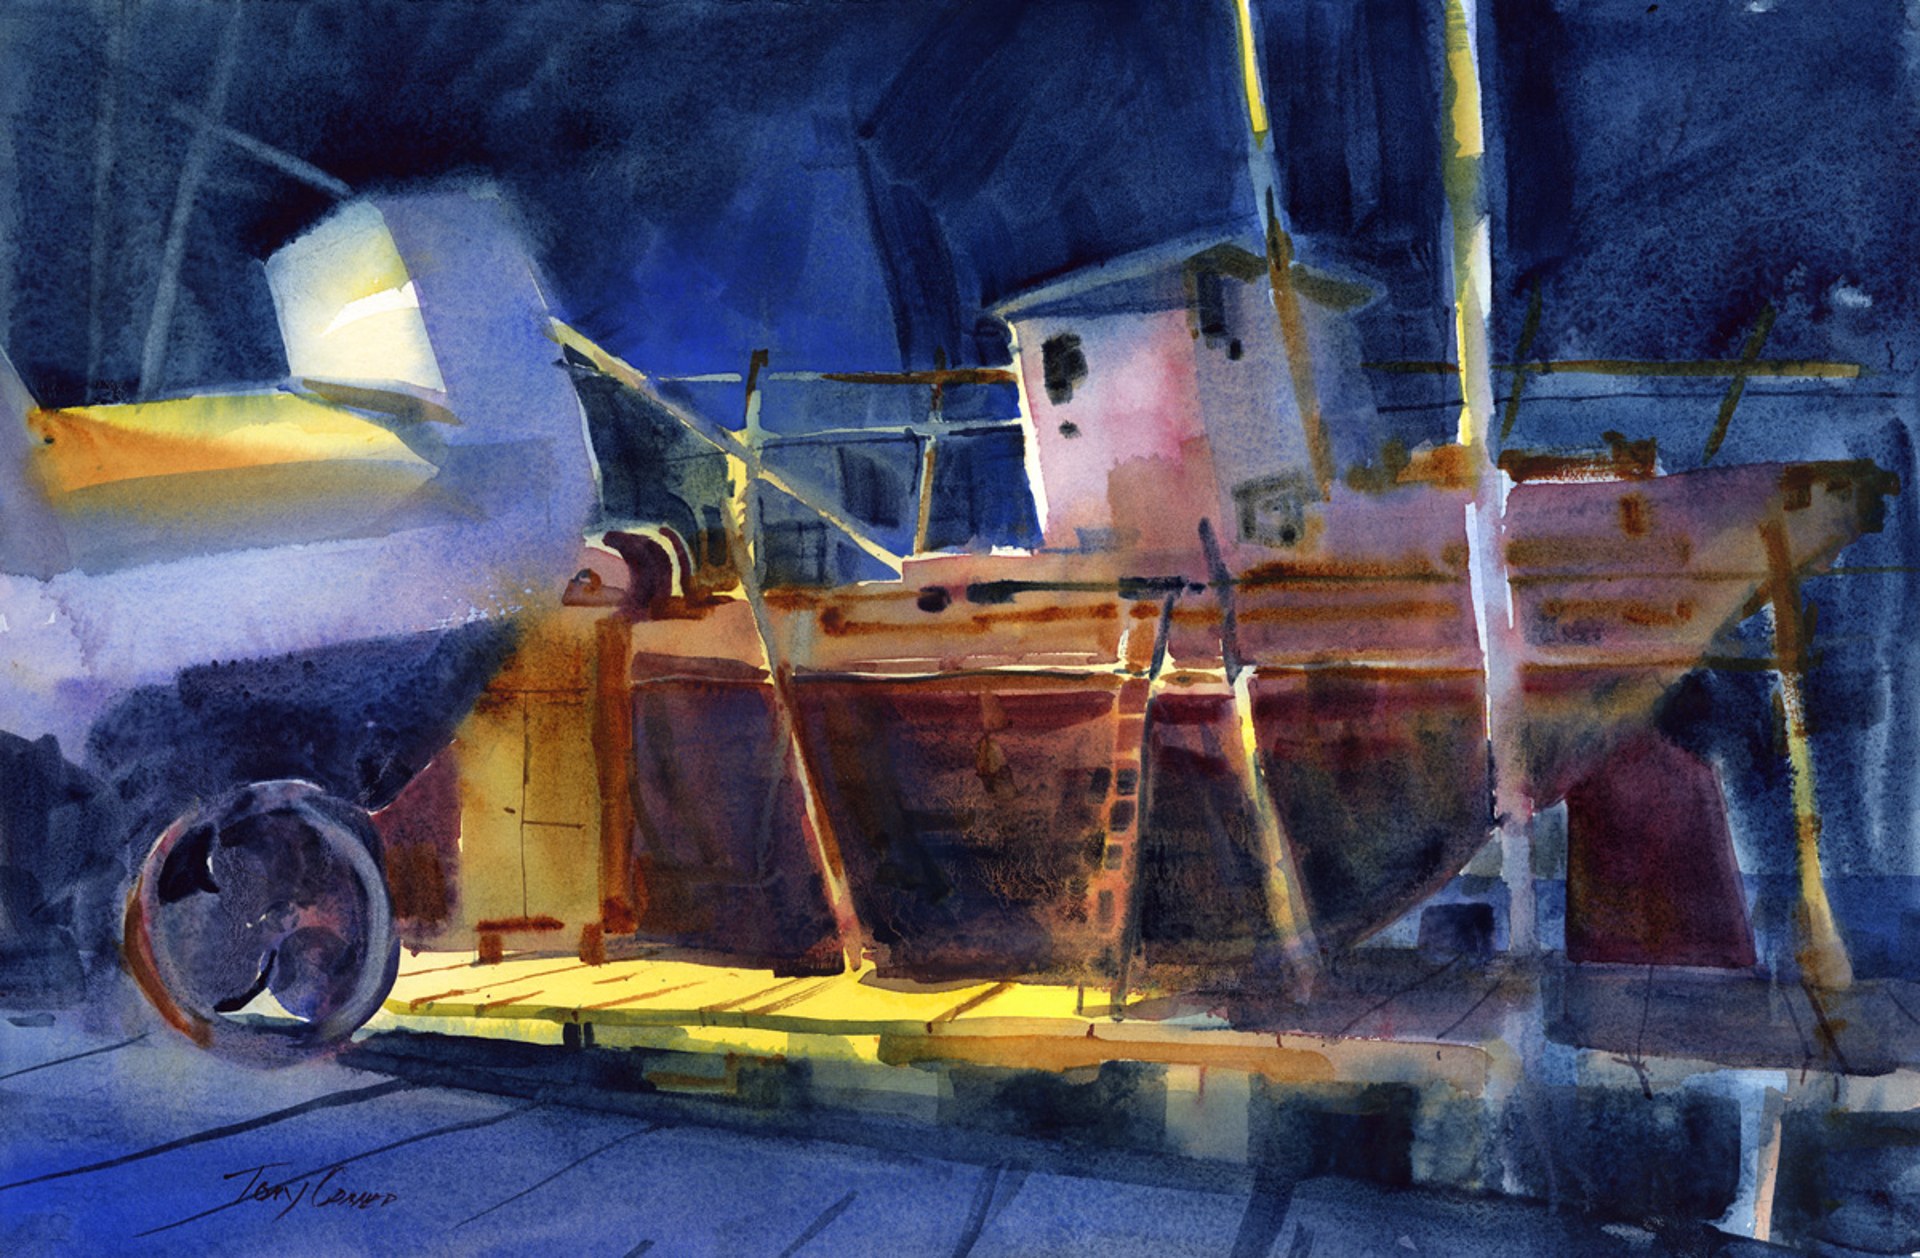 Dry Dock at Night by Tony Conner